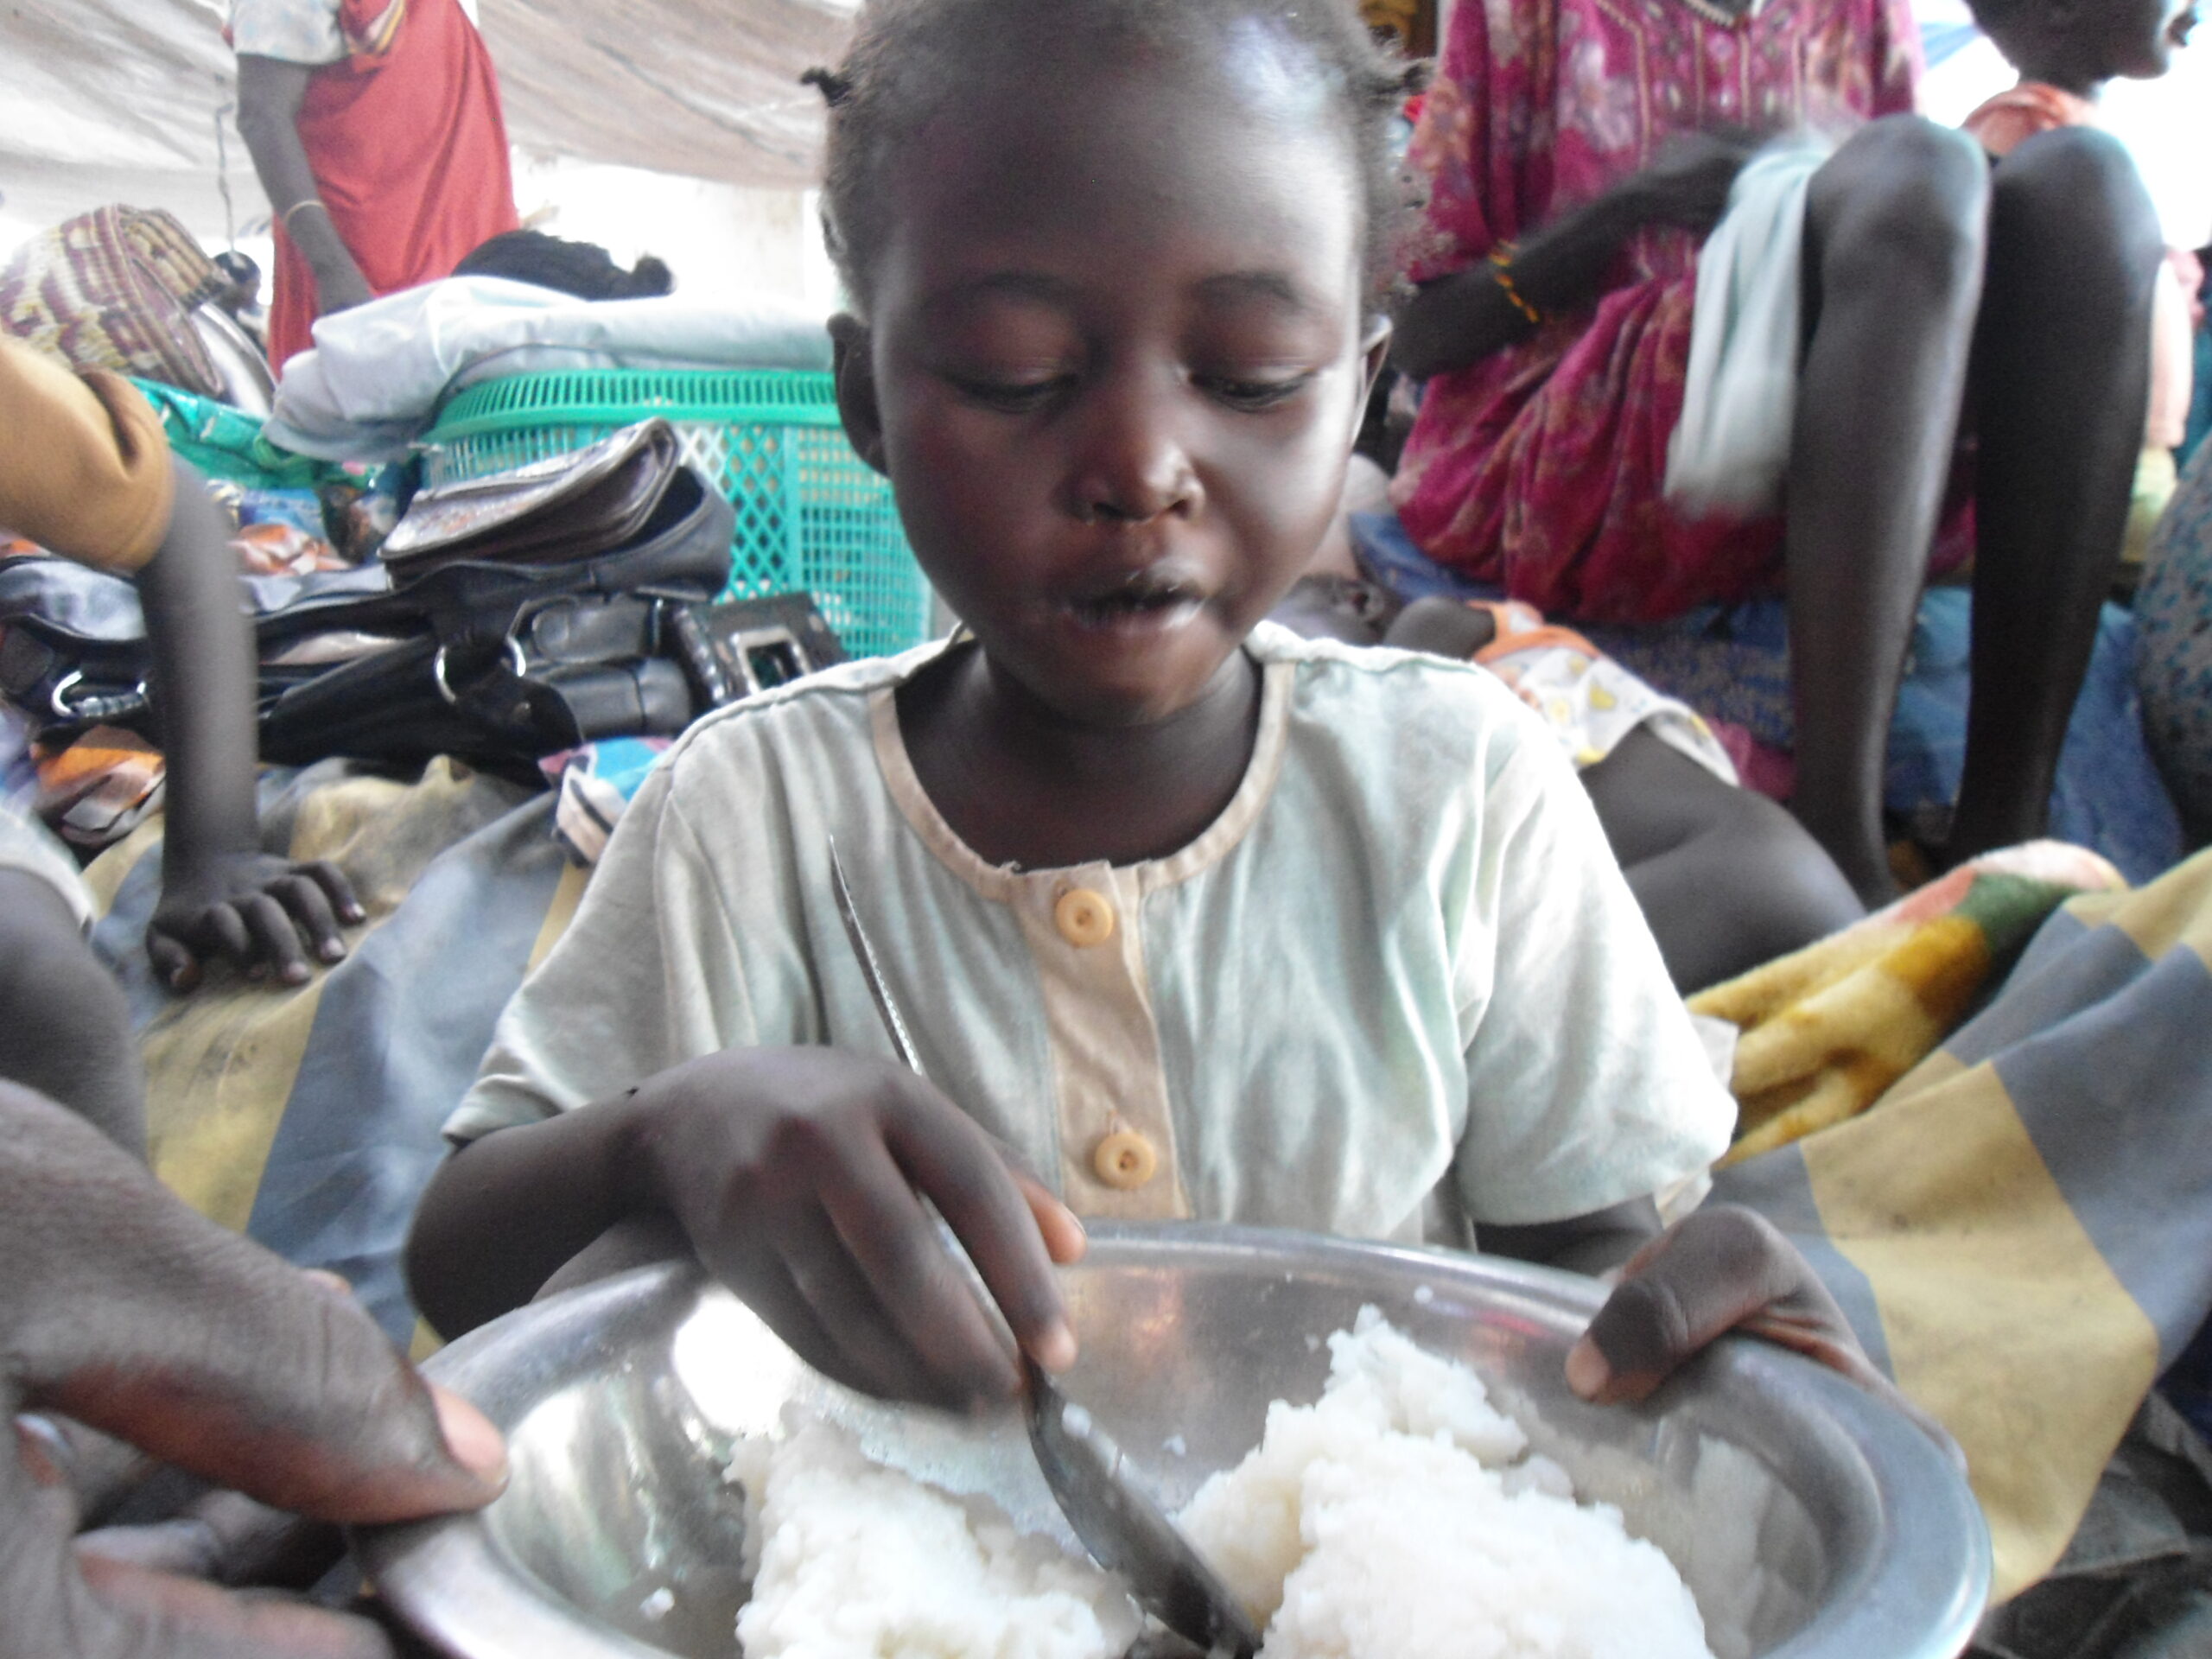 A returnee child eating boiled rice at Bor docking point, Jonglei, August 22, 2012 (ST)